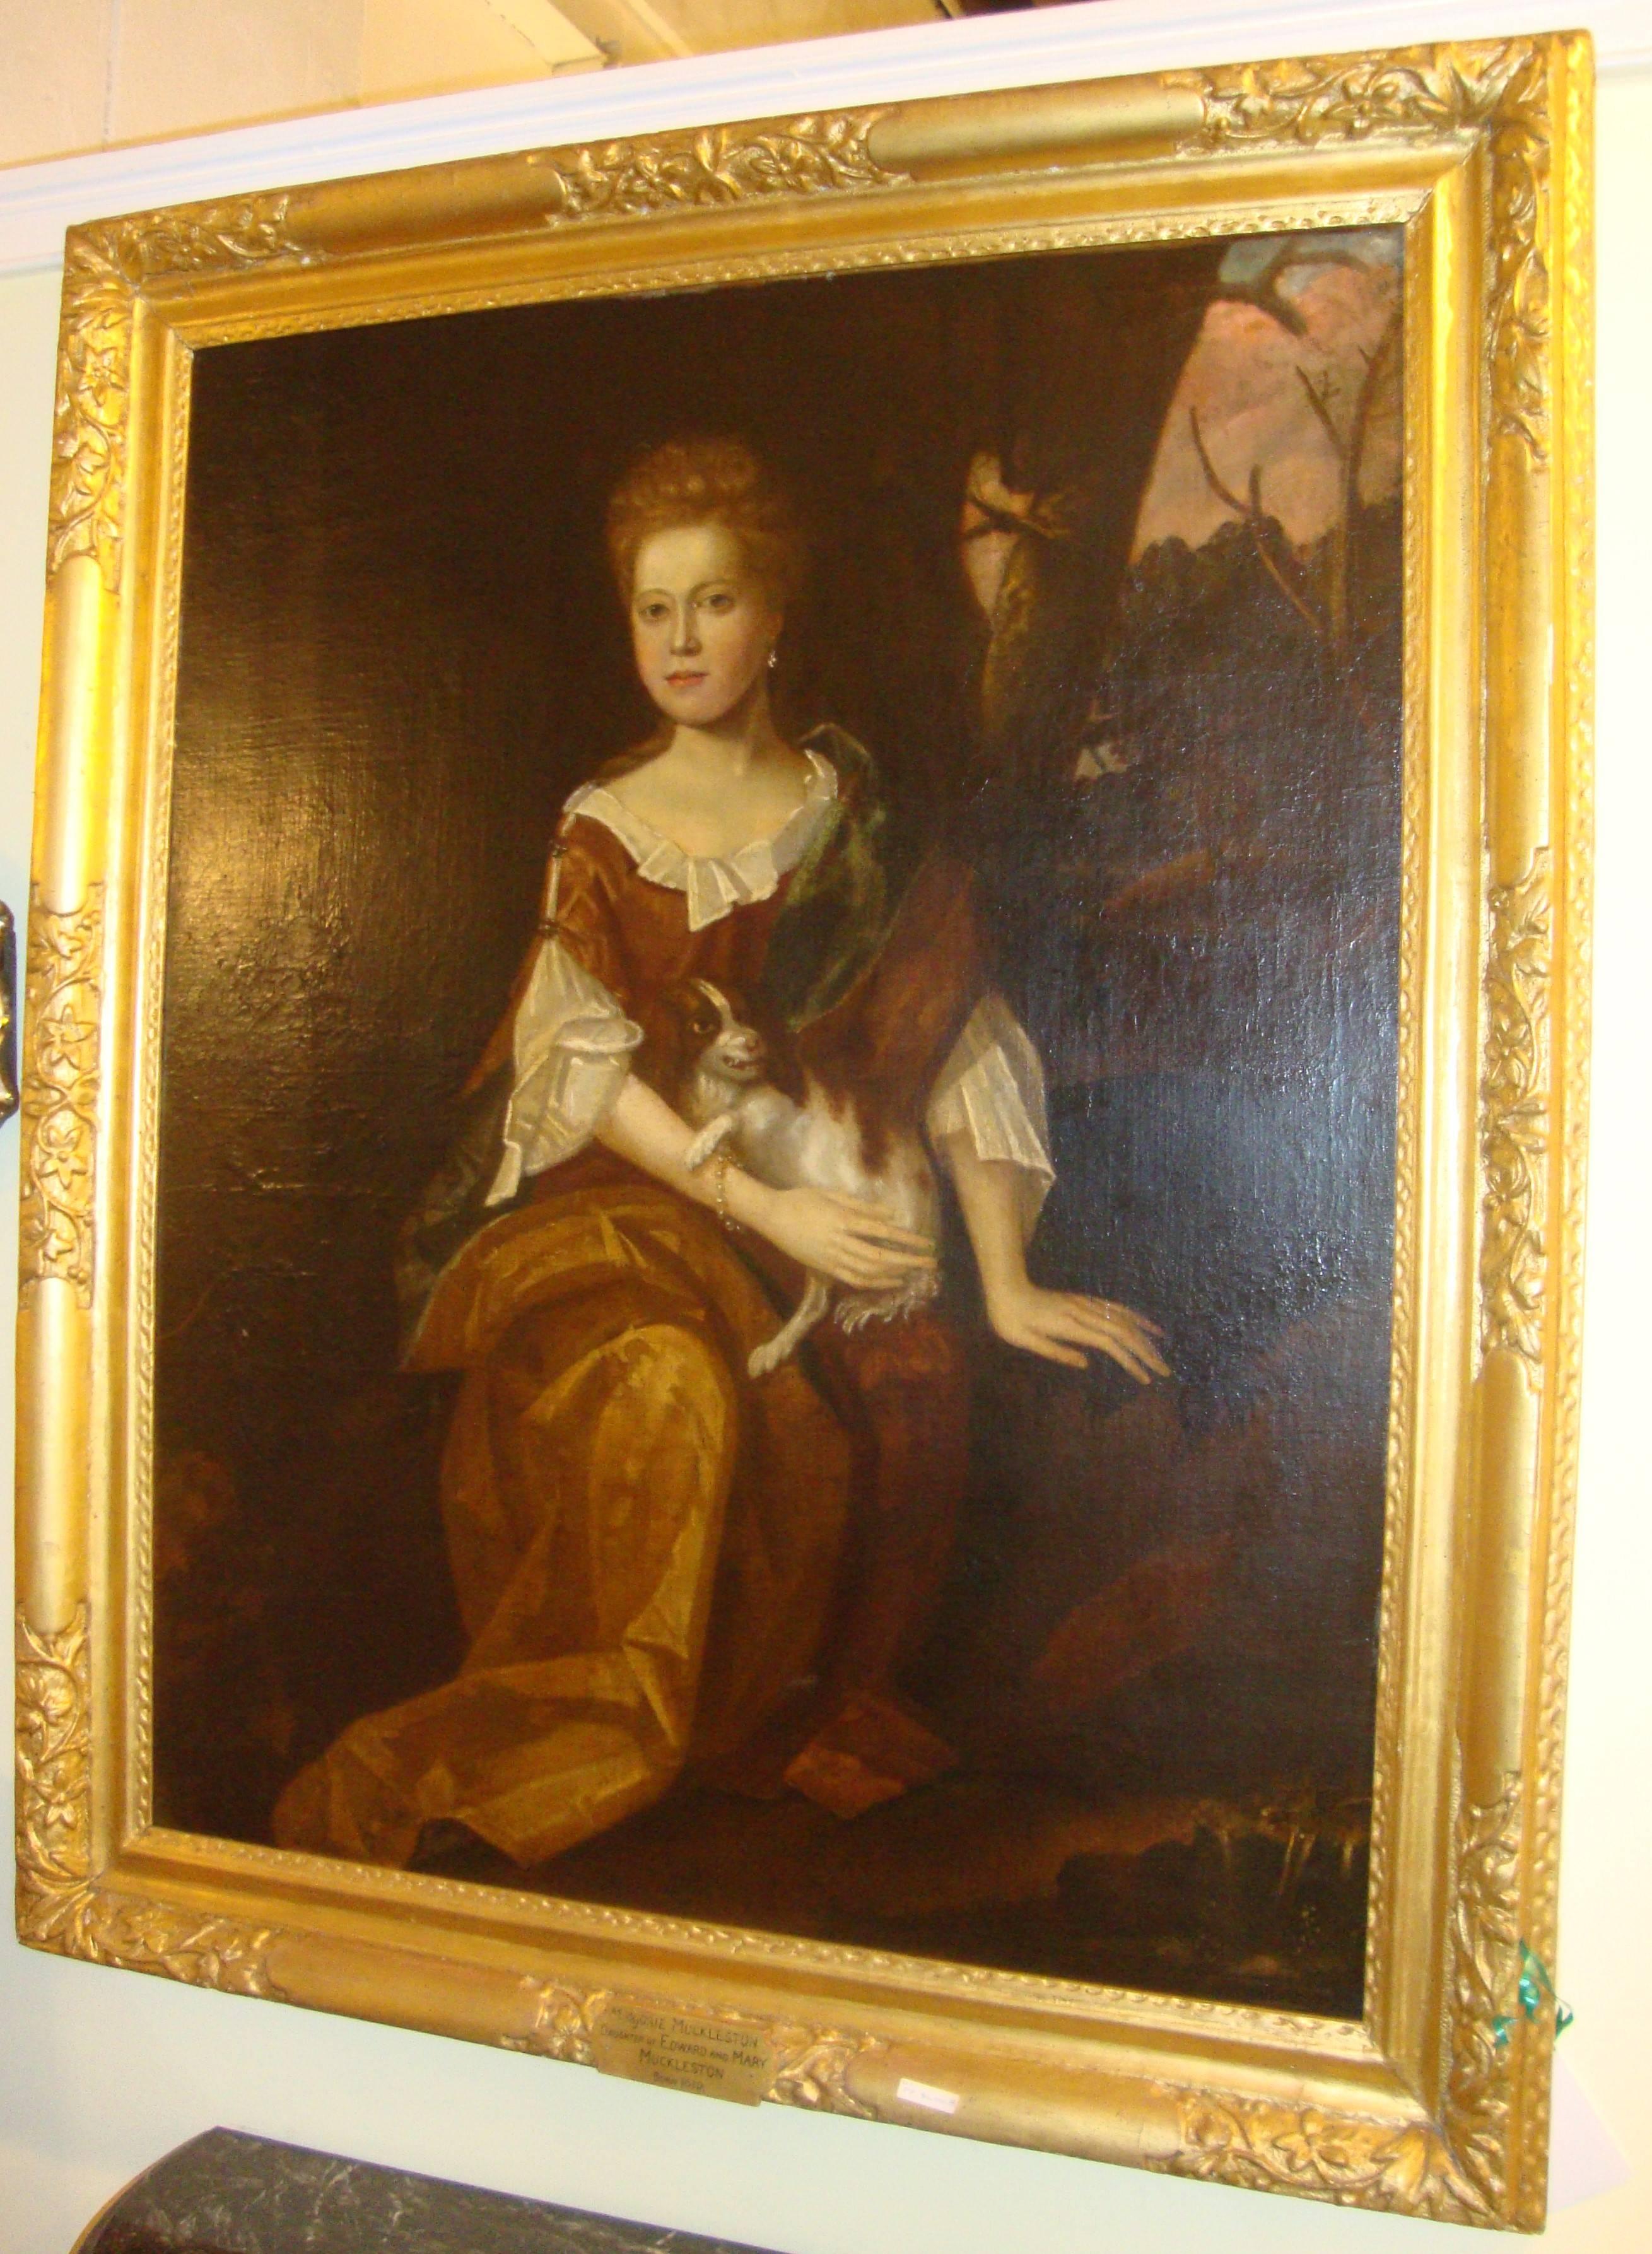 An unsigned portrait painting of Marjorie Muckleston with her dog, circa 18th century. Oil on canvas. Canvas relined. English school. Origin: Prov. William Doyle Galleries. This painting sits in its original carved finely gilt frame and is decorated